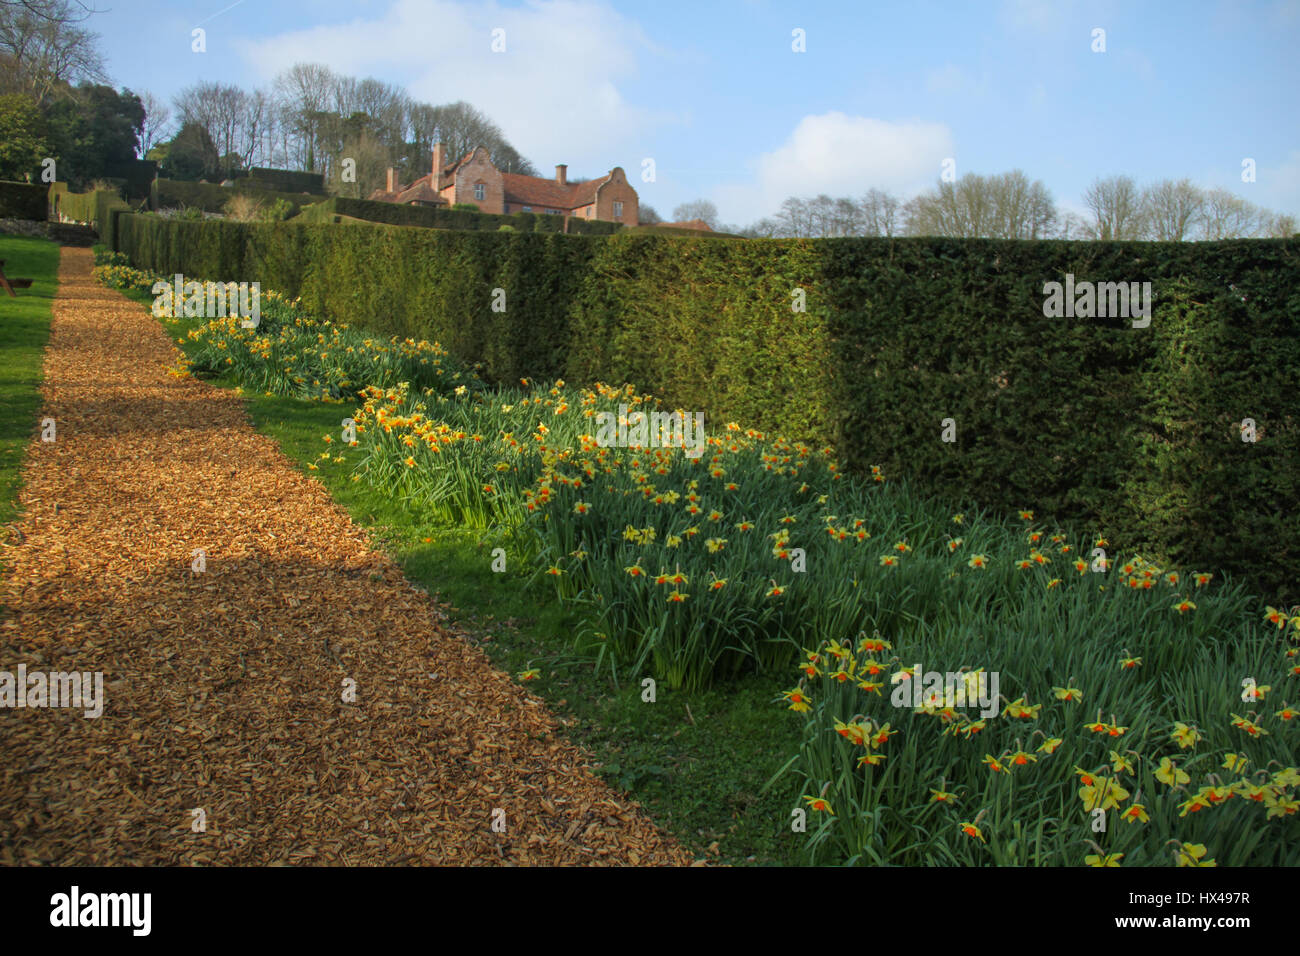 London, UK. March 24, 2017: General views of  the Port Lymnpe mansion and landscaped gardens designed by architect Sir Herbert Baker for Sir Philip Sassoon.  Port Lympne Reserve near the town of Hythe in Kent, England is set in 600 acres and incorporates the historic mansion and landscaped gardens. © David Mbiyu/Alamy Live News Stock Photo